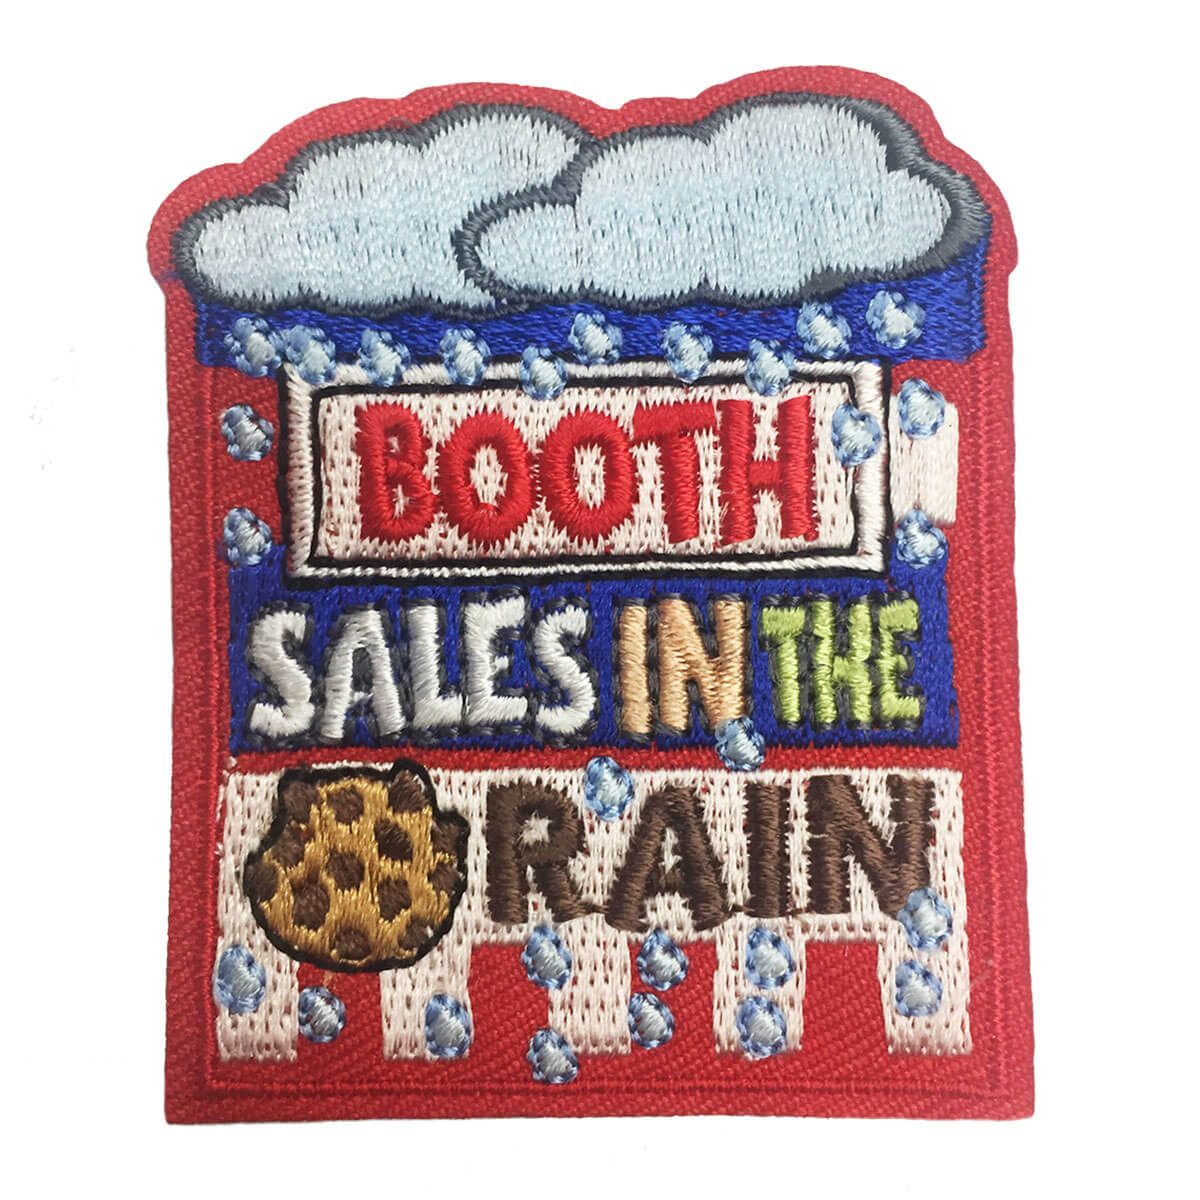 Booth Sales in the Rain - W